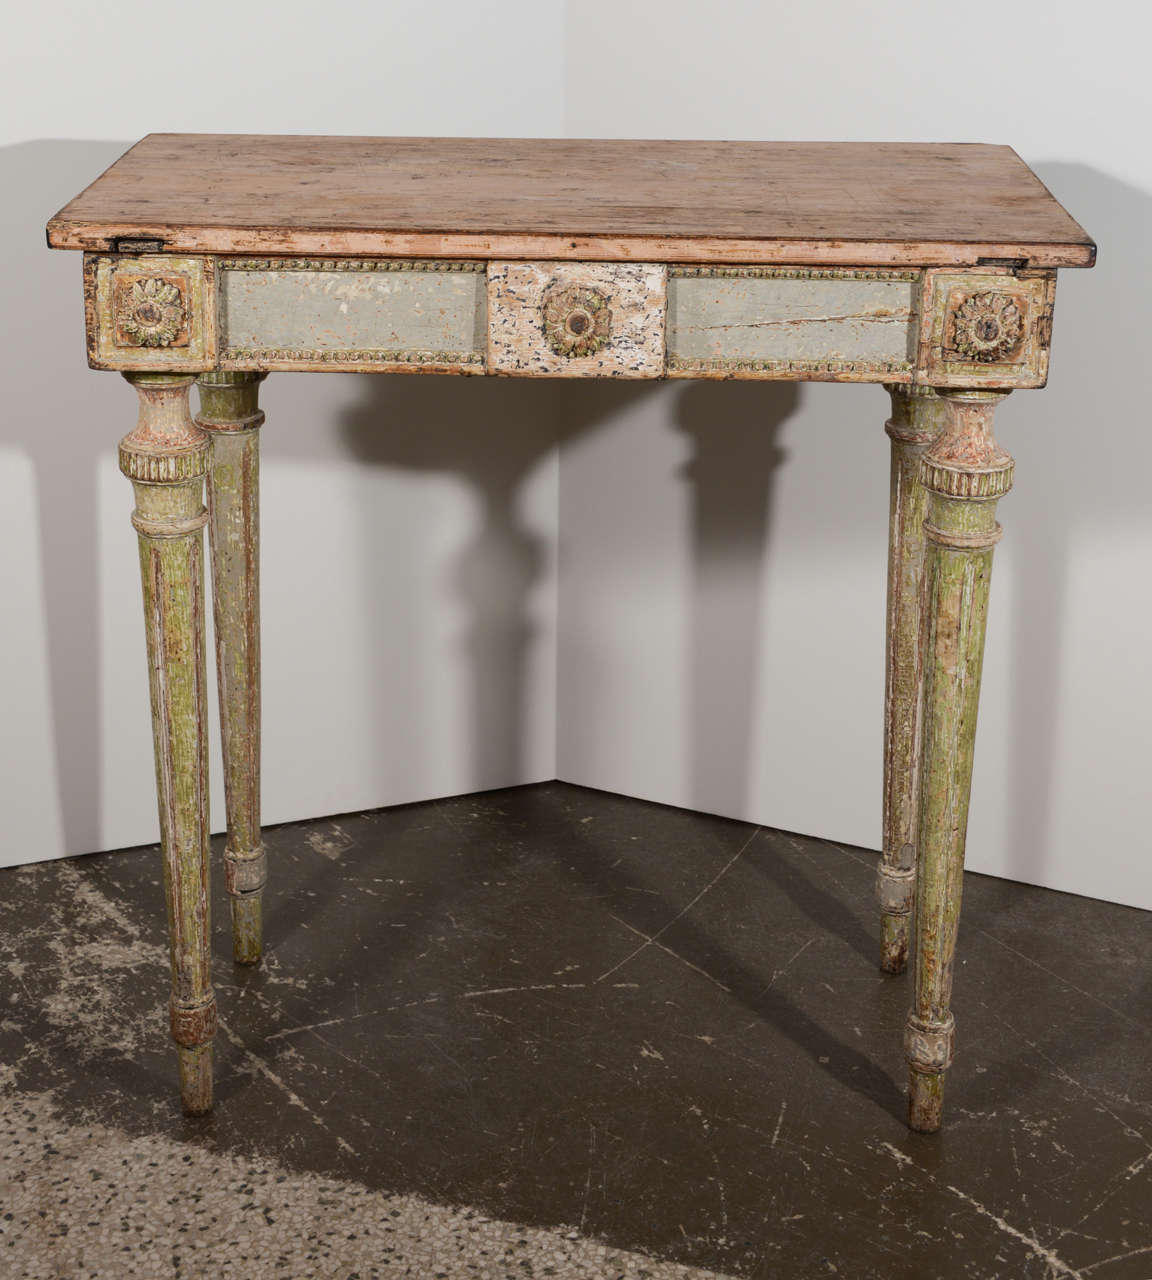 Period painted Gustavian console with Empire decoration and fluted legs.